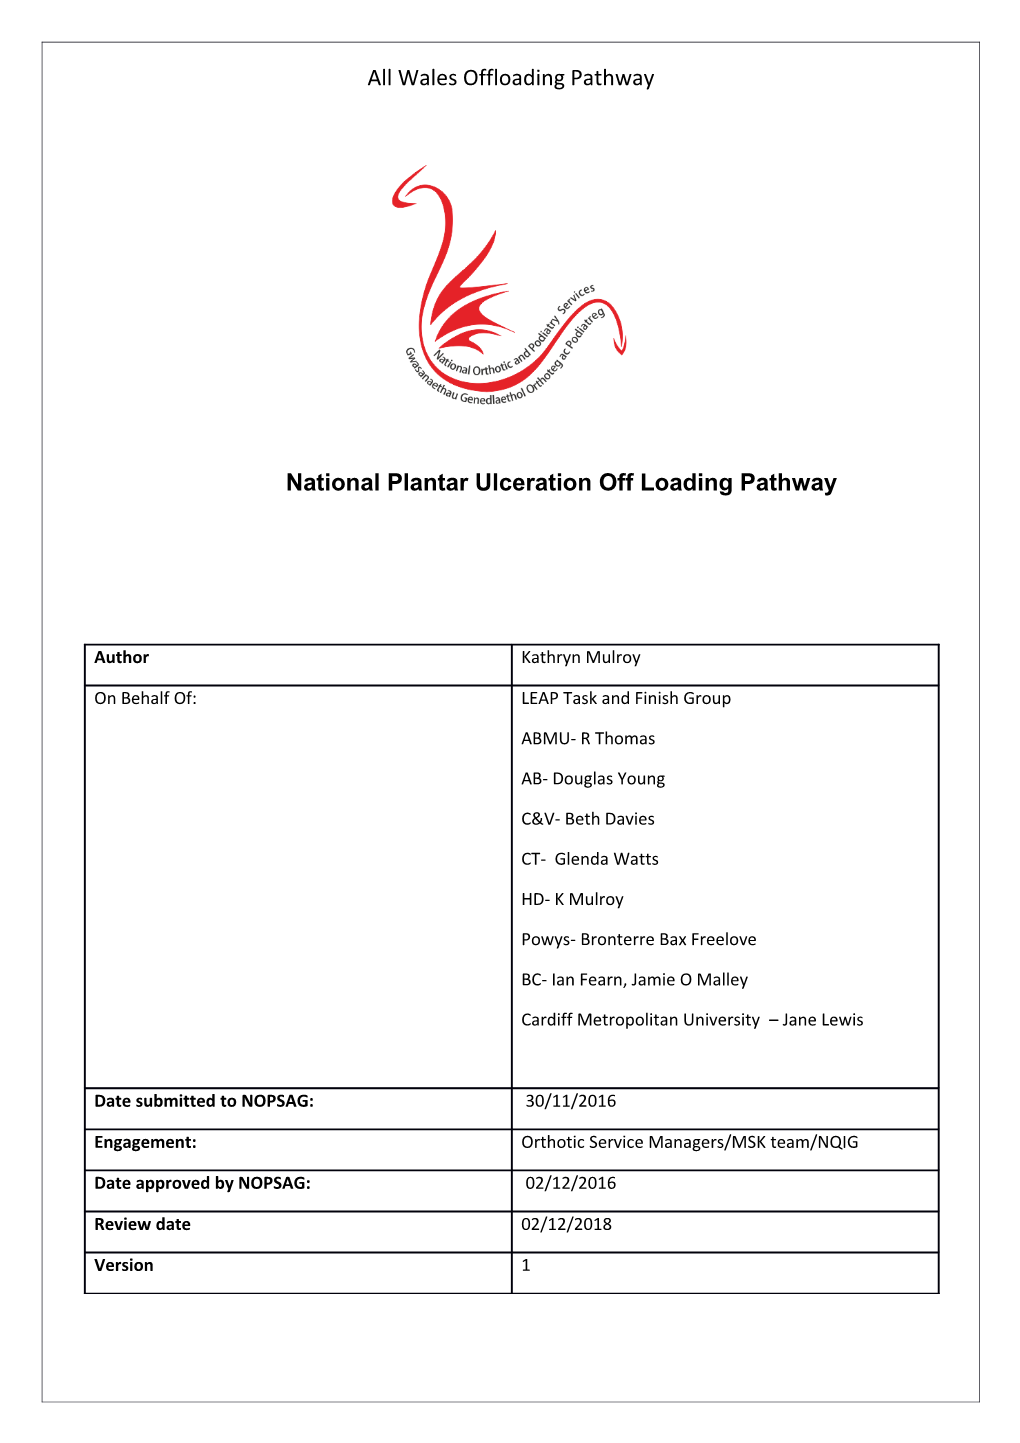 All Wales Offloading Pathway